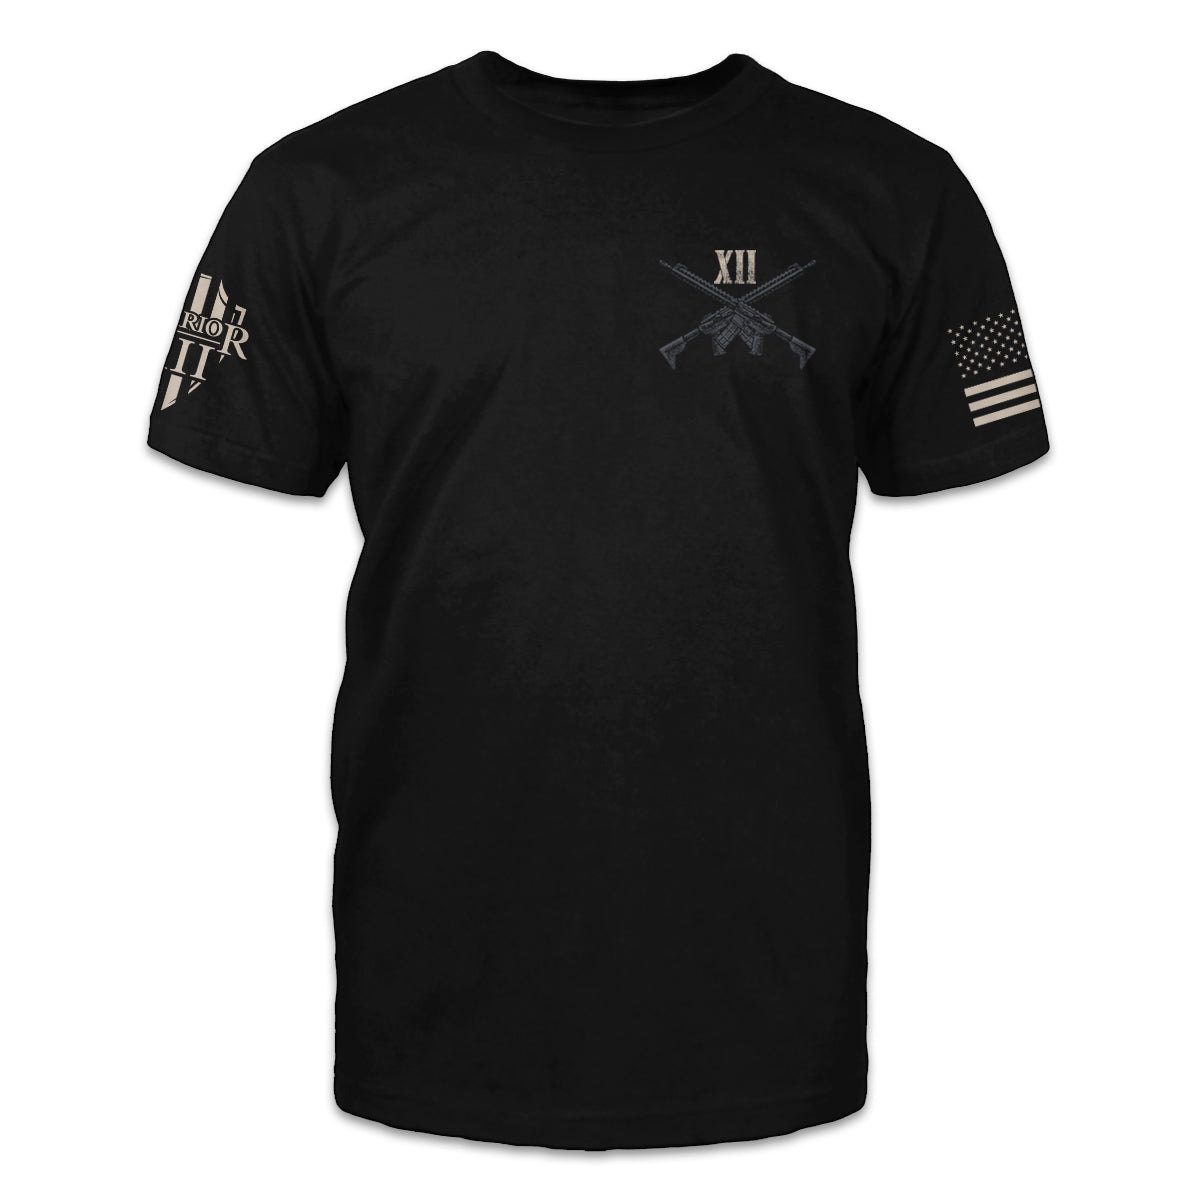 The front of a black t-shirt which has a small pocket image of two crossed AR-15 rifles.